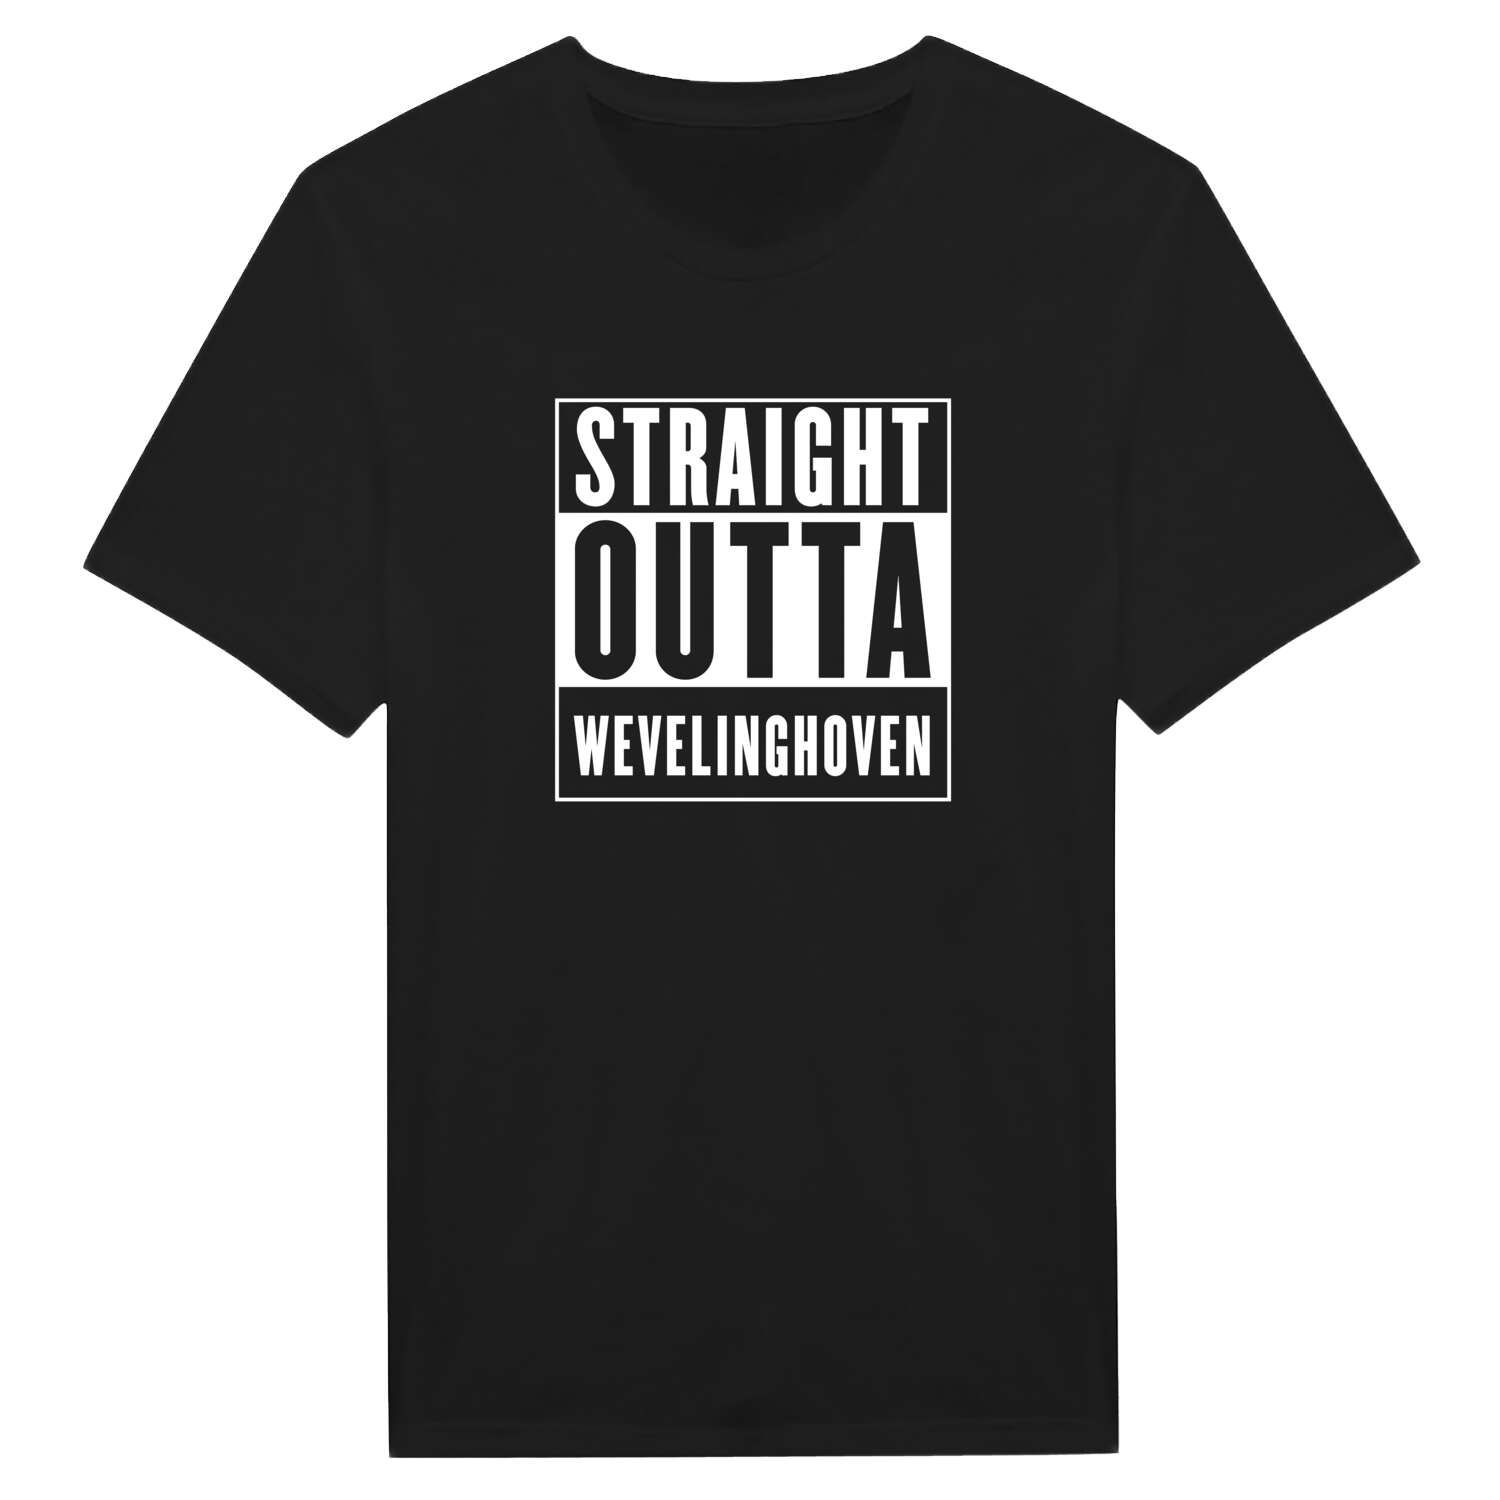 Wevelinghoven T-Shirt »Straight Outta«